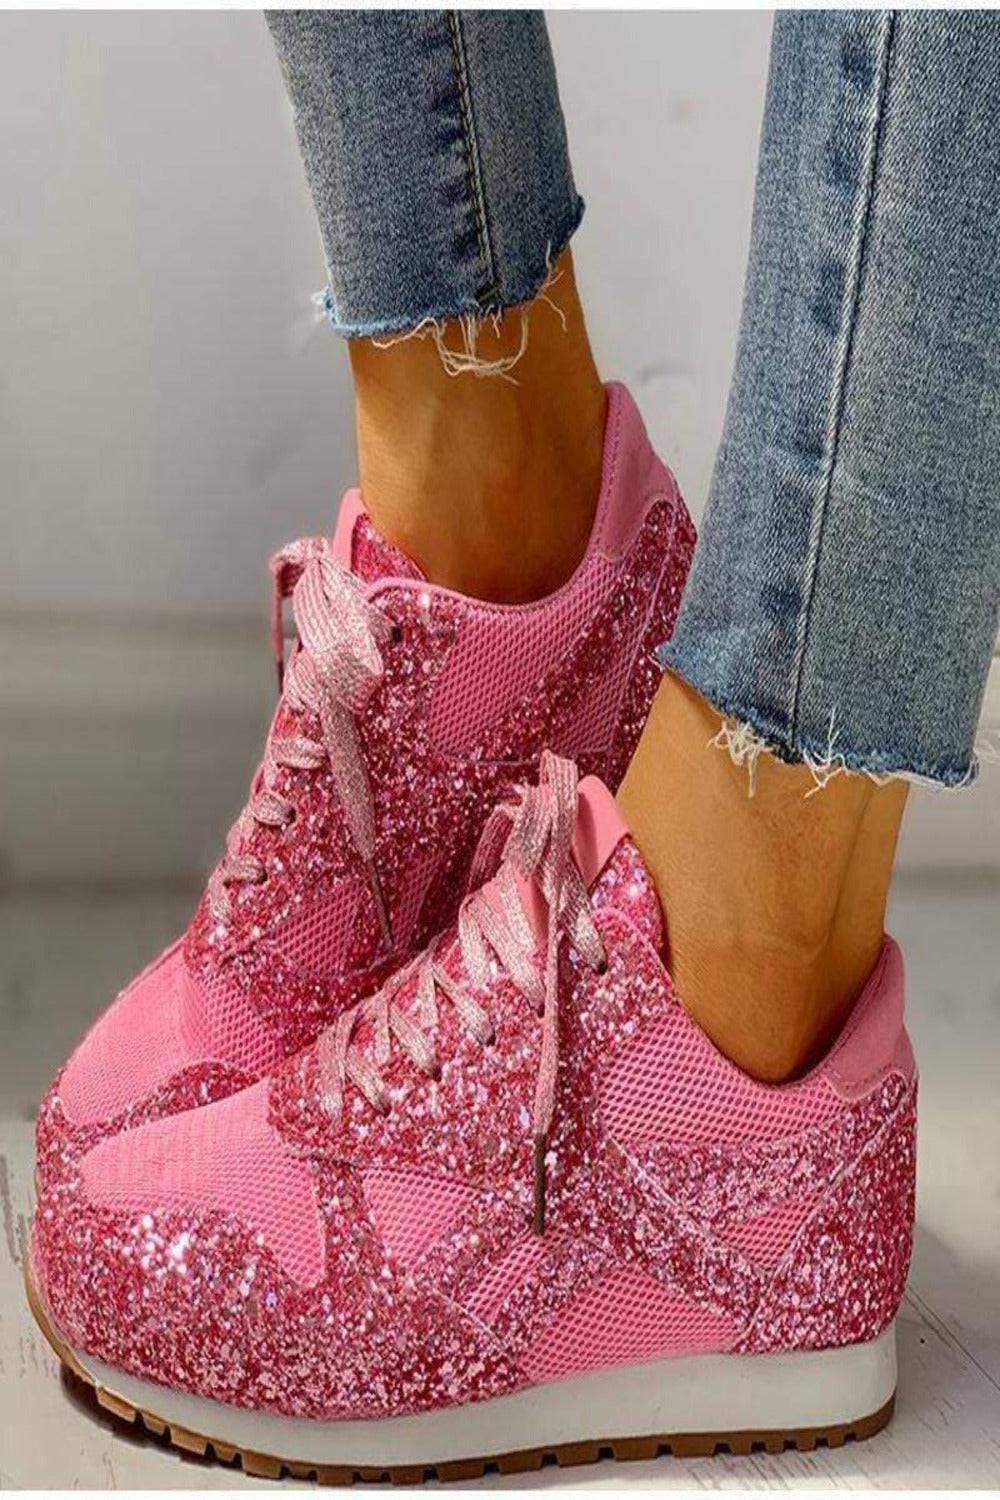 Glitter Lace Up Pink Sparkle Sneakers Pink / 11